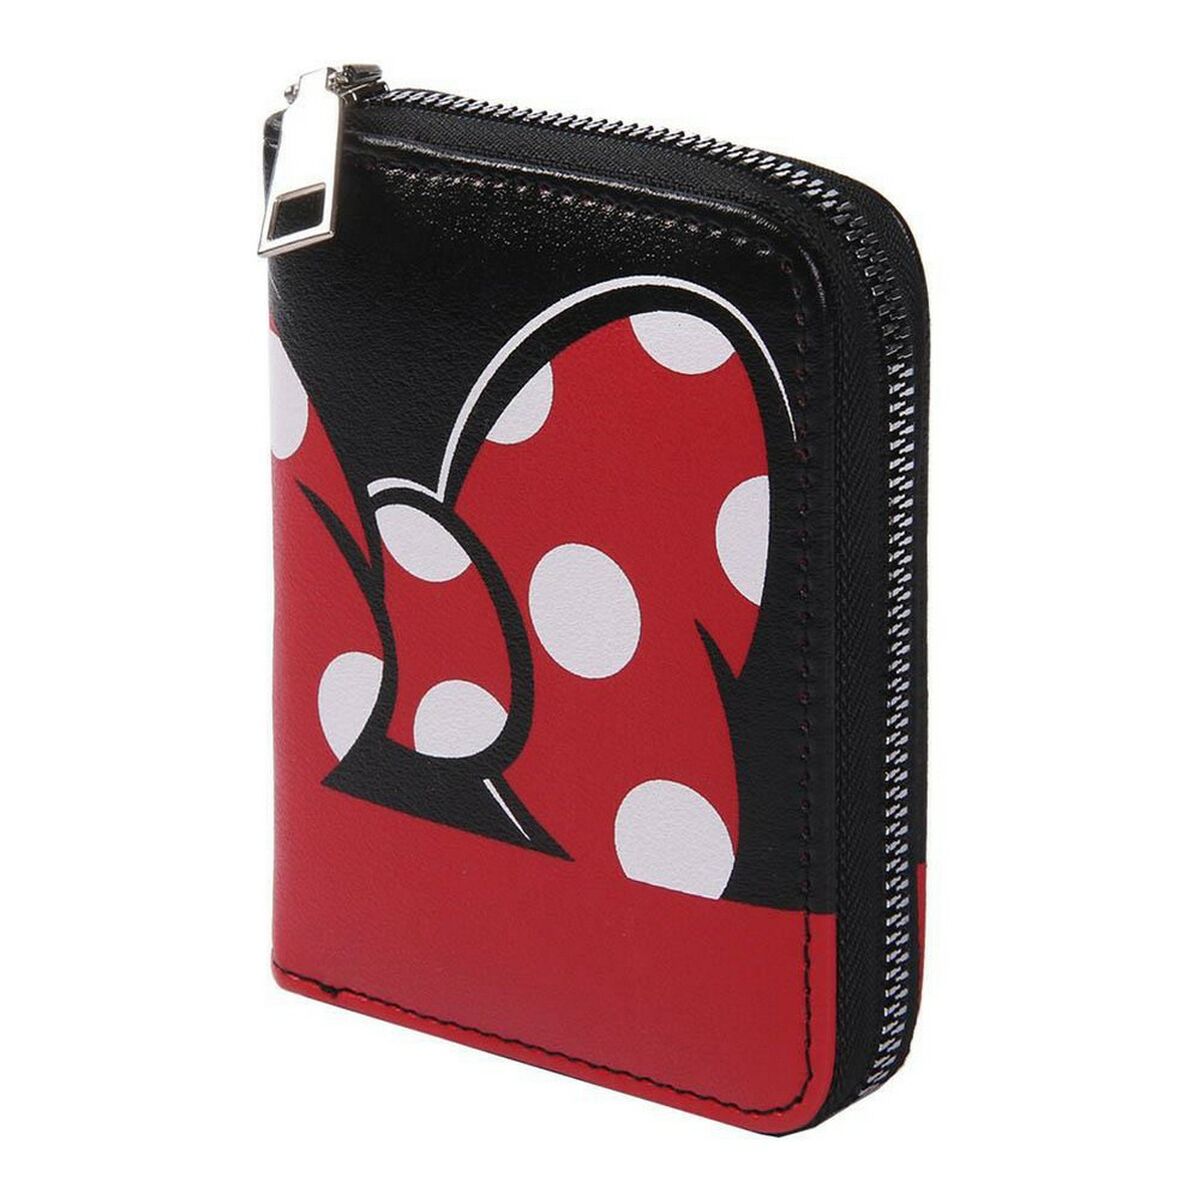 Purse Minnie Mouse Red Black